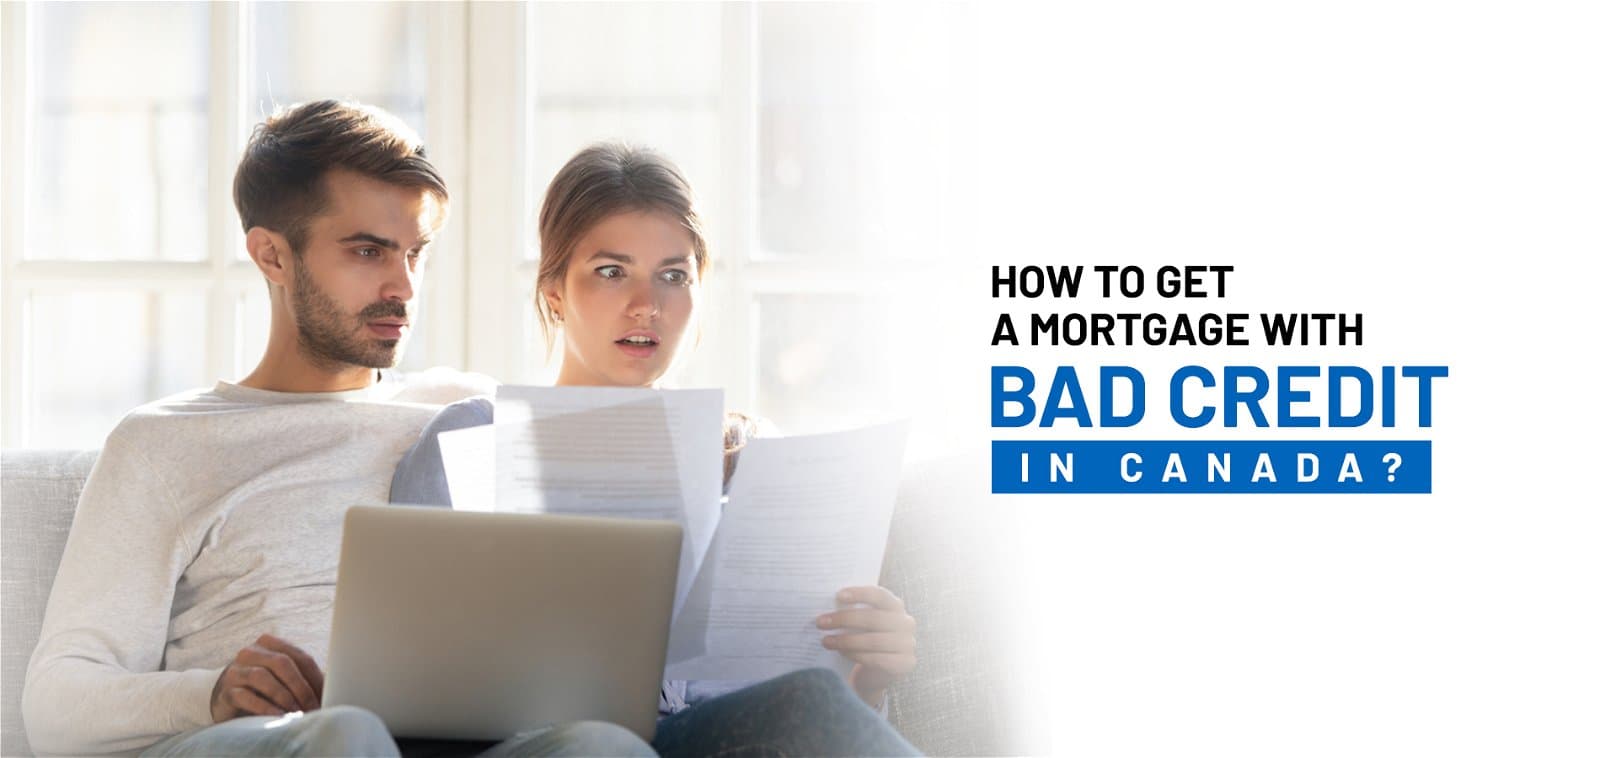 How To Get a Mortgage With Bad Credit in Canada?